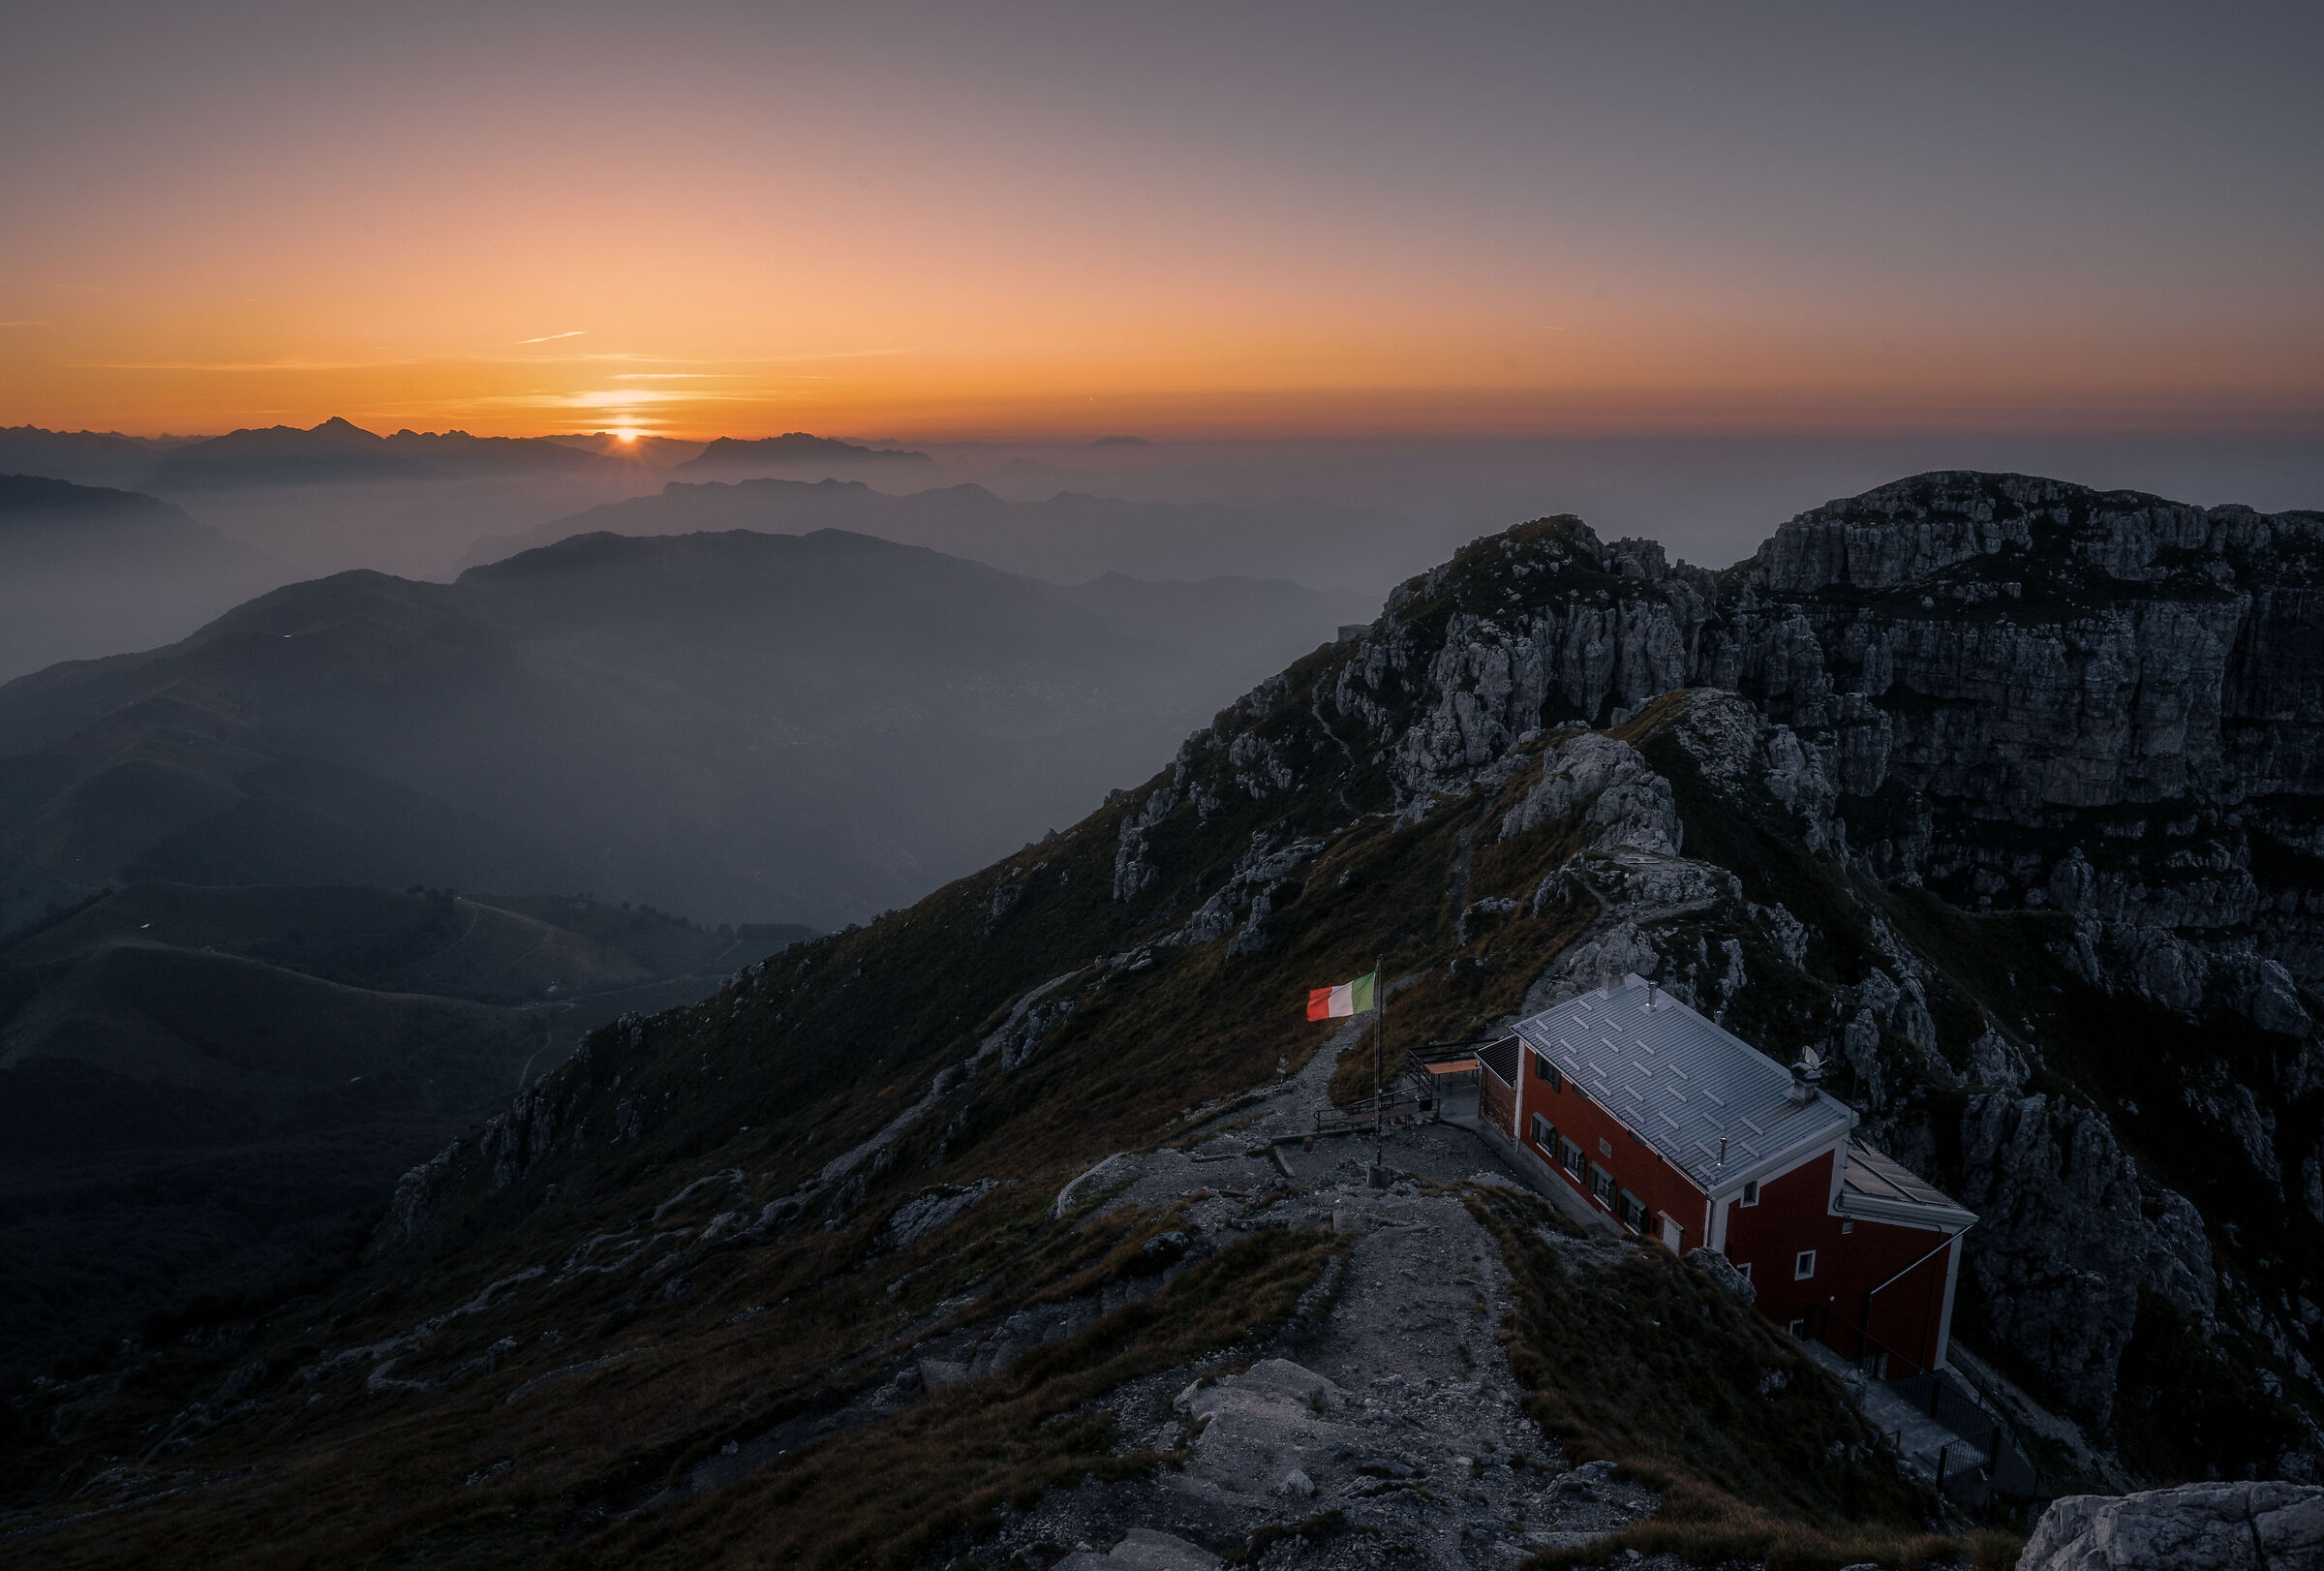 The peace of dawn at 1850 m...